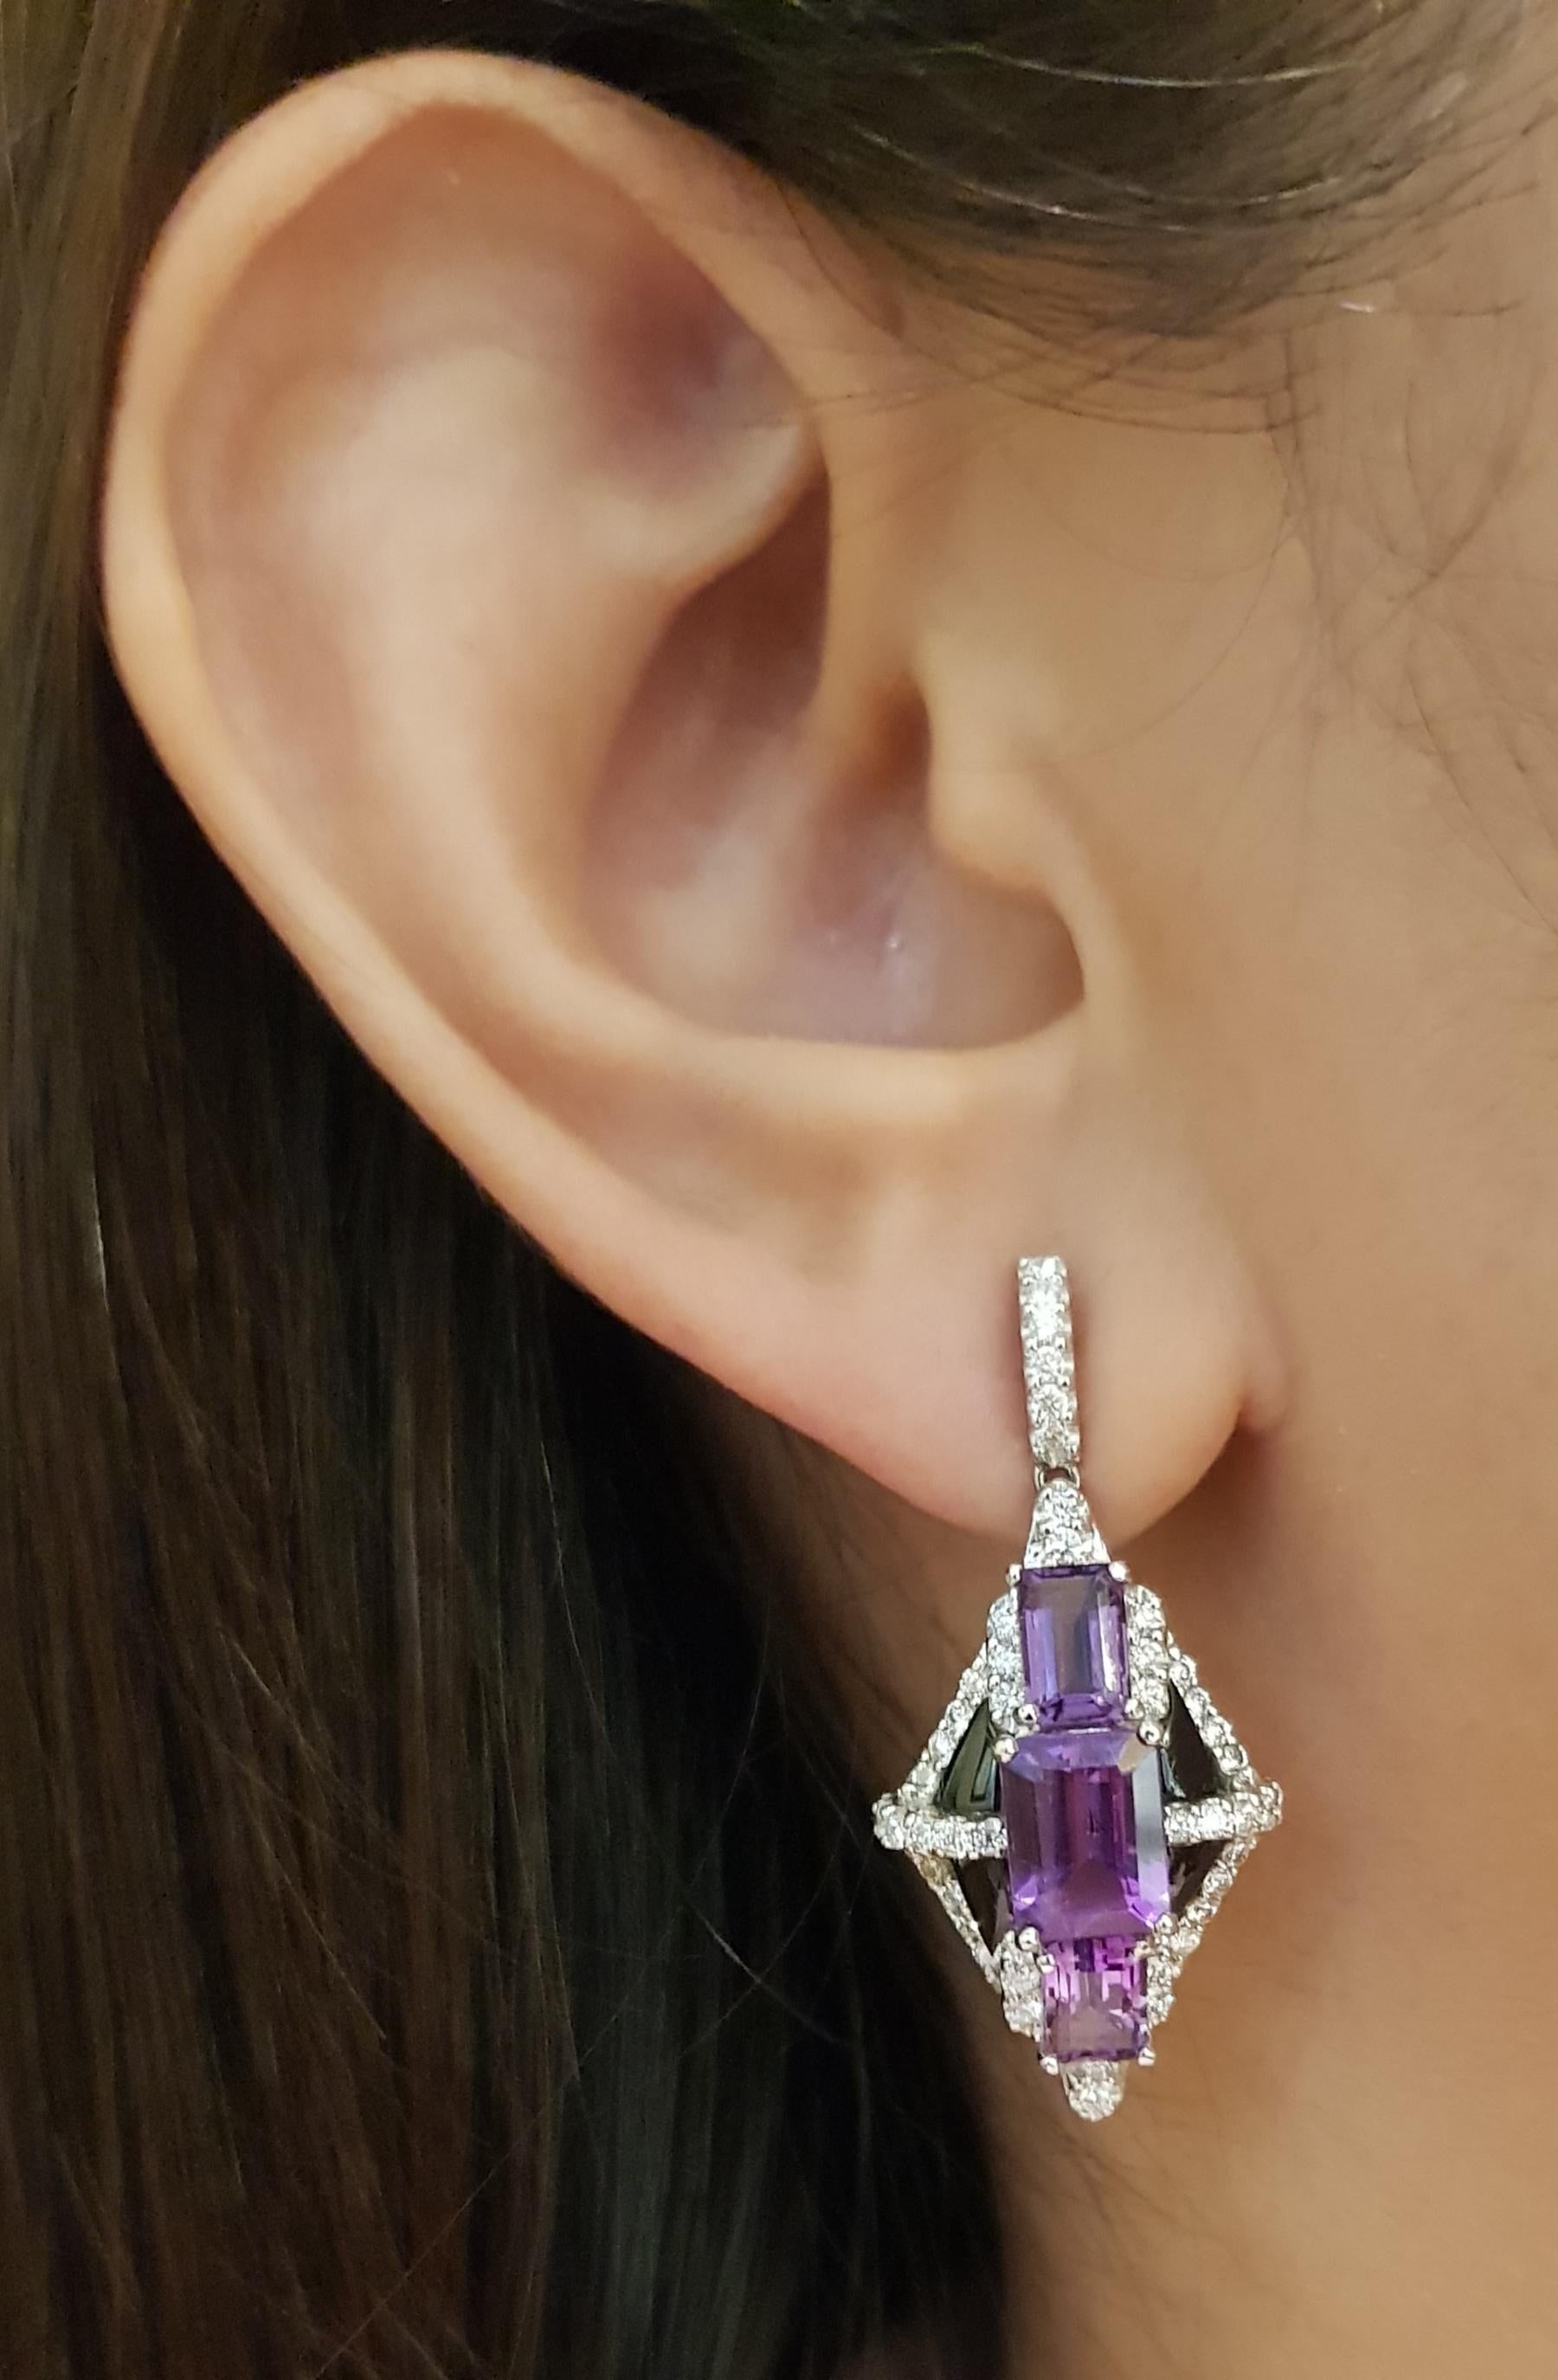 Amethyst 5.81 carats with Diamond 1.06 carats and Onyx Earrings set in 18 Karat White Gold Settings

Width:  1.7 cm 
Length:  3.5 cm
Total Weight: 11.87 grams

